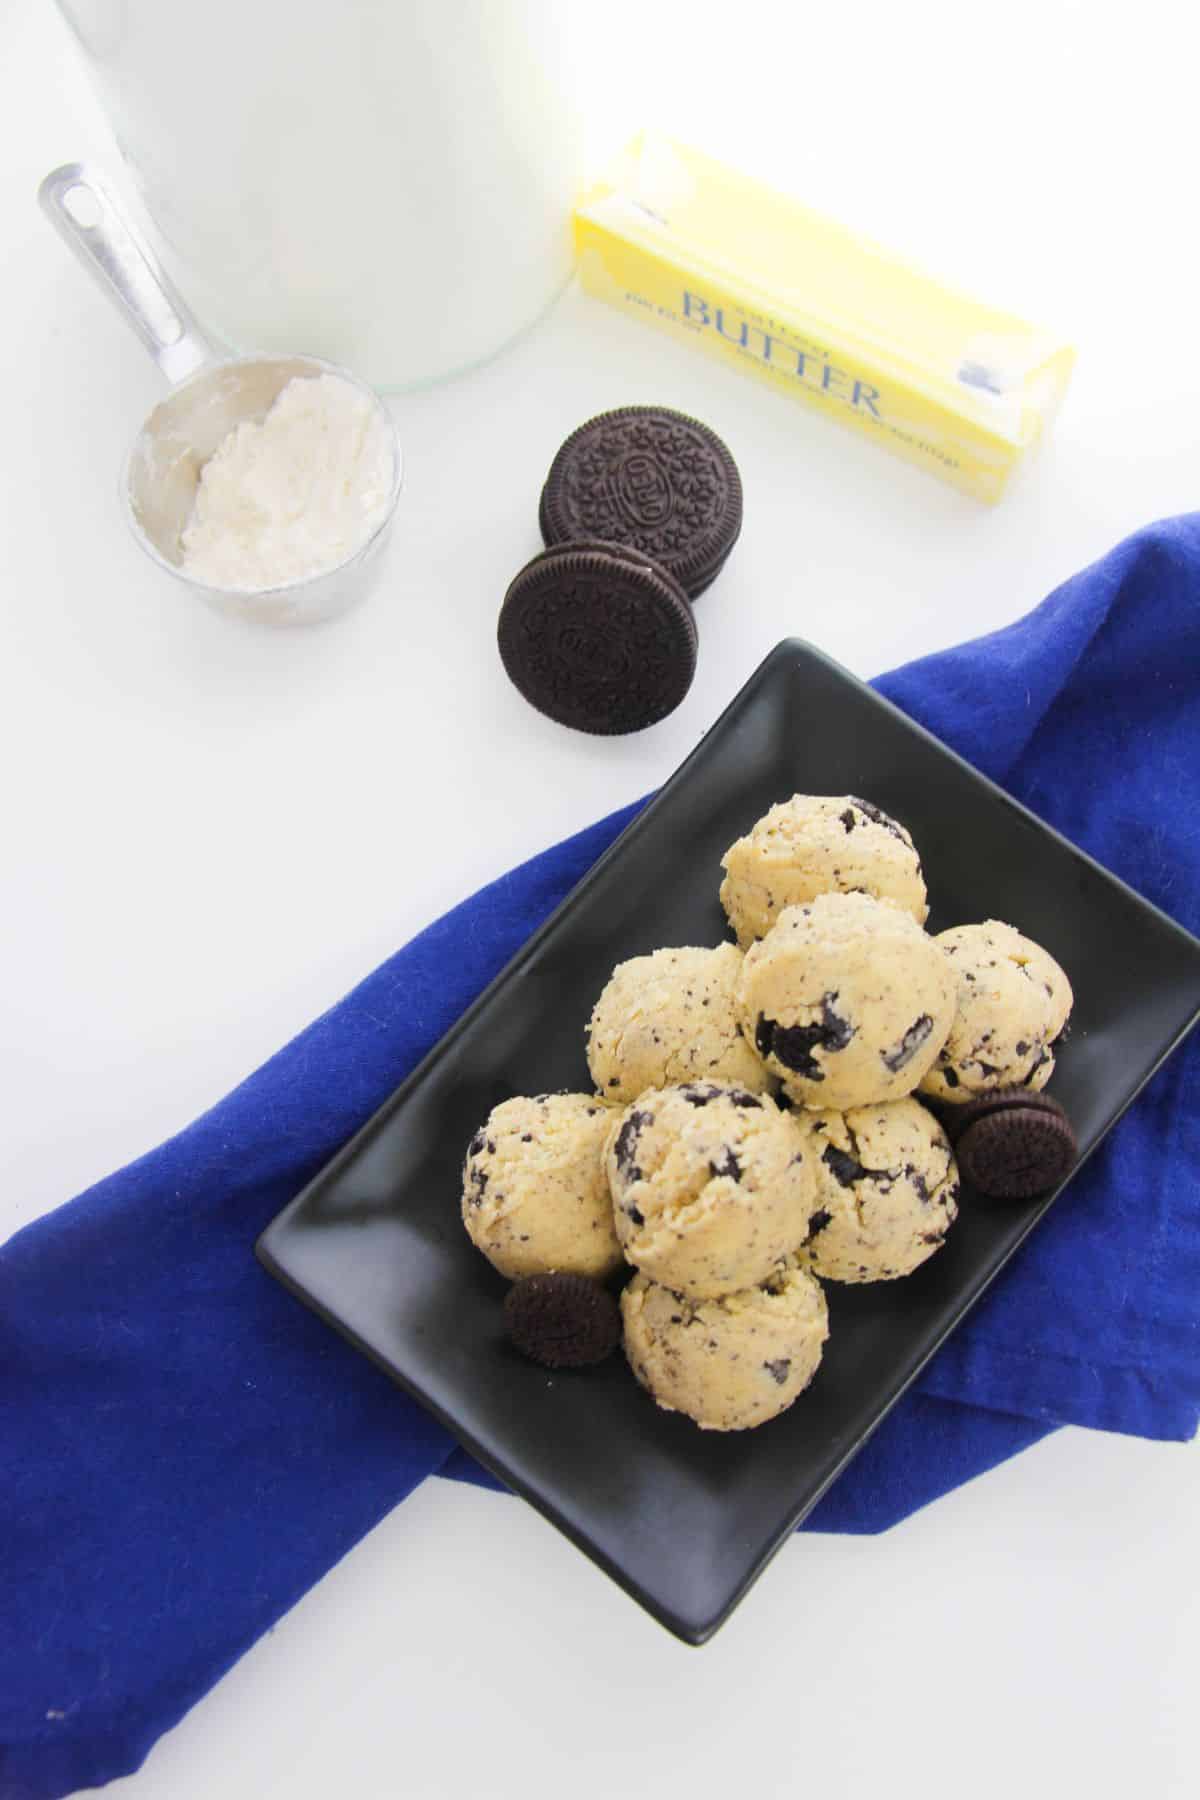 Oreos Cookie Dough on a serving plate, with ingredients on the side.